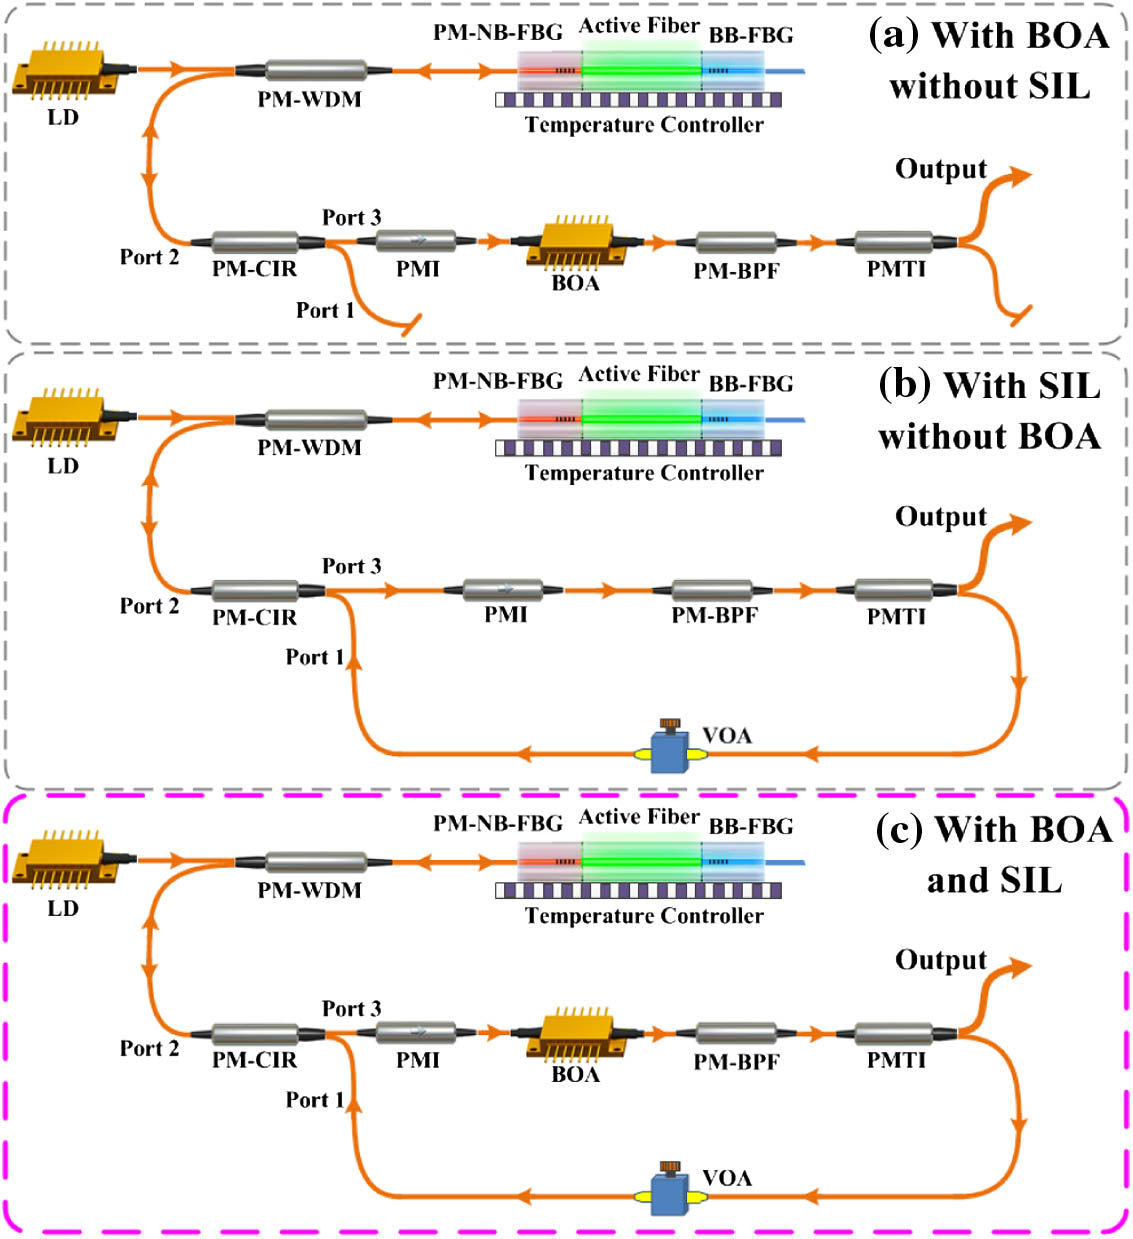 Experimental setup in different structures (a) with BOA without SIL, (b) with SIL without BOA, and (c) with BOA and SIL. FBG, fiber Bragg grating; PM-NB-FBG, PM narrow-band FBG; BB-FBG, broadband FBG; LD, laser diode; PM-WDM, PM wavelength division multiplexer; PM-CIR, PM circulator; PMI, PM isolator; PM-BPF, PM bandpass filter; PMTI, PM tap isolator; VOA, variable optical attenuator.